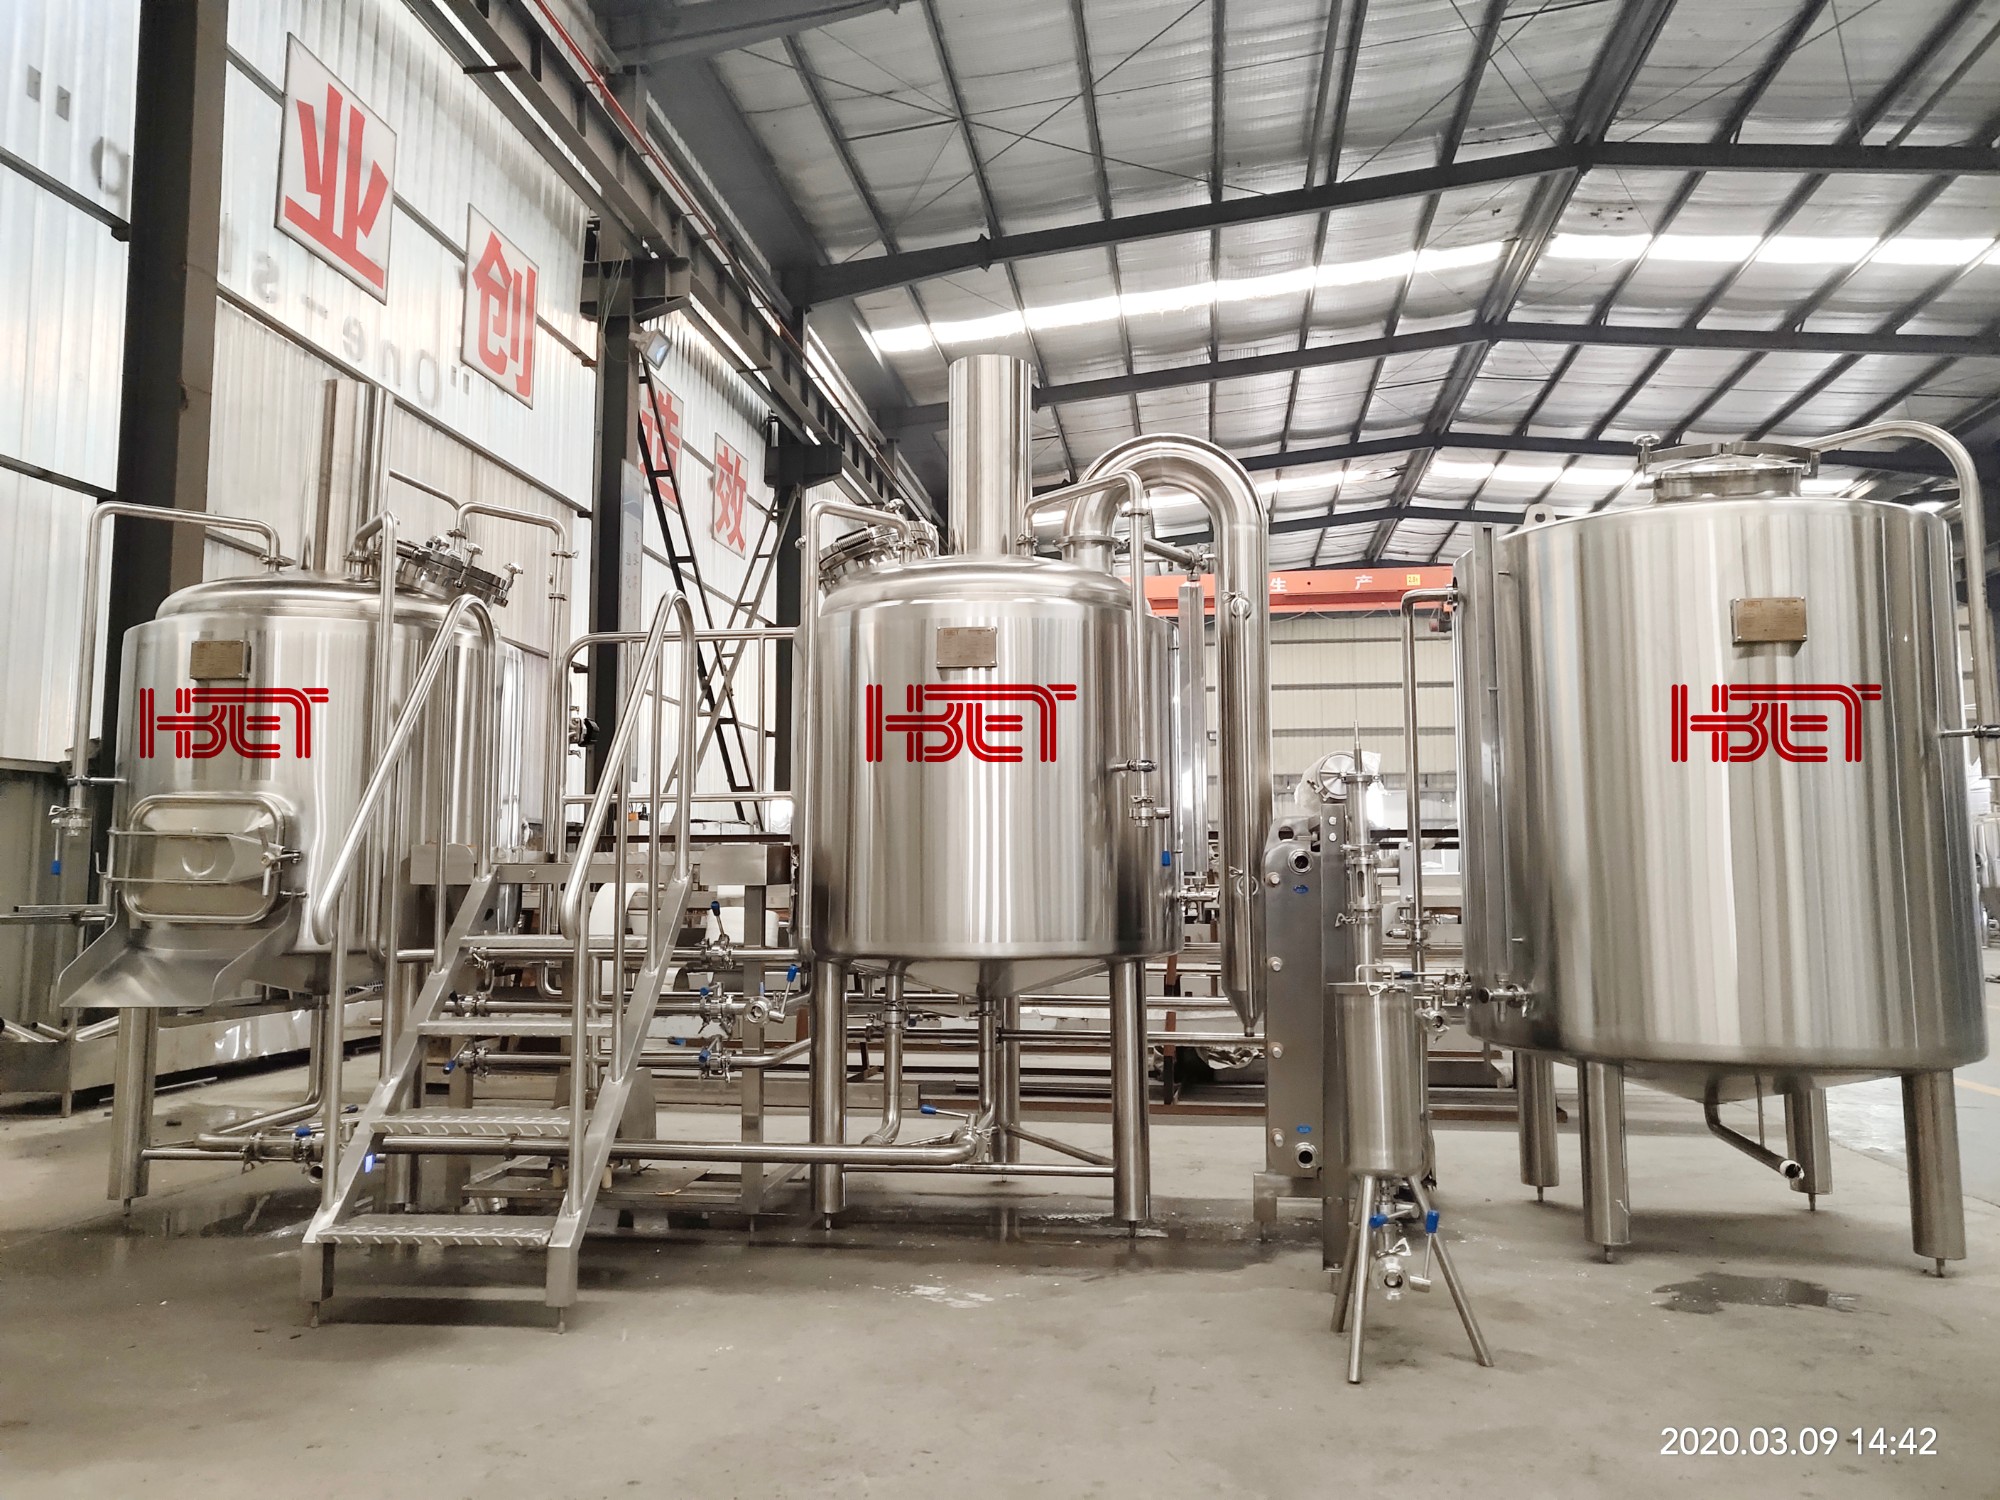 500L complete brewery equipment is expected to arrive in Constanta port in May